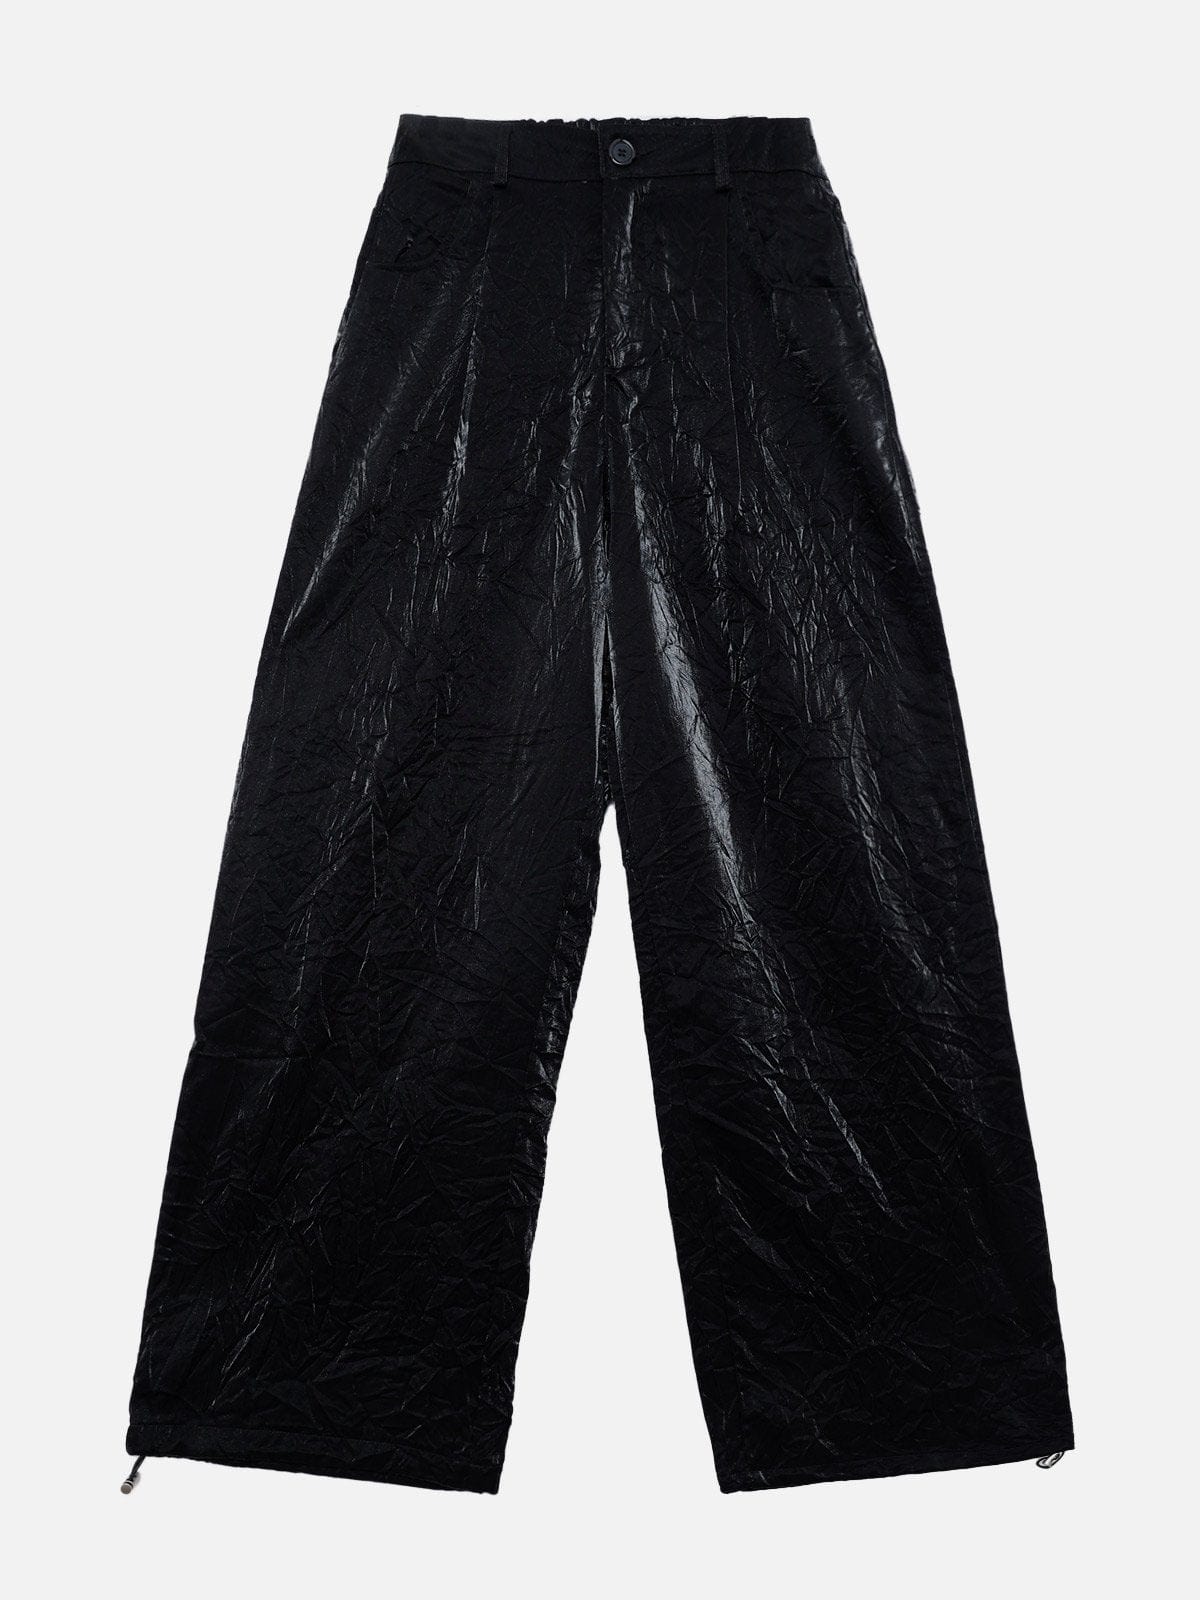 NEV Flowing Fabric Pleated Textured Pants